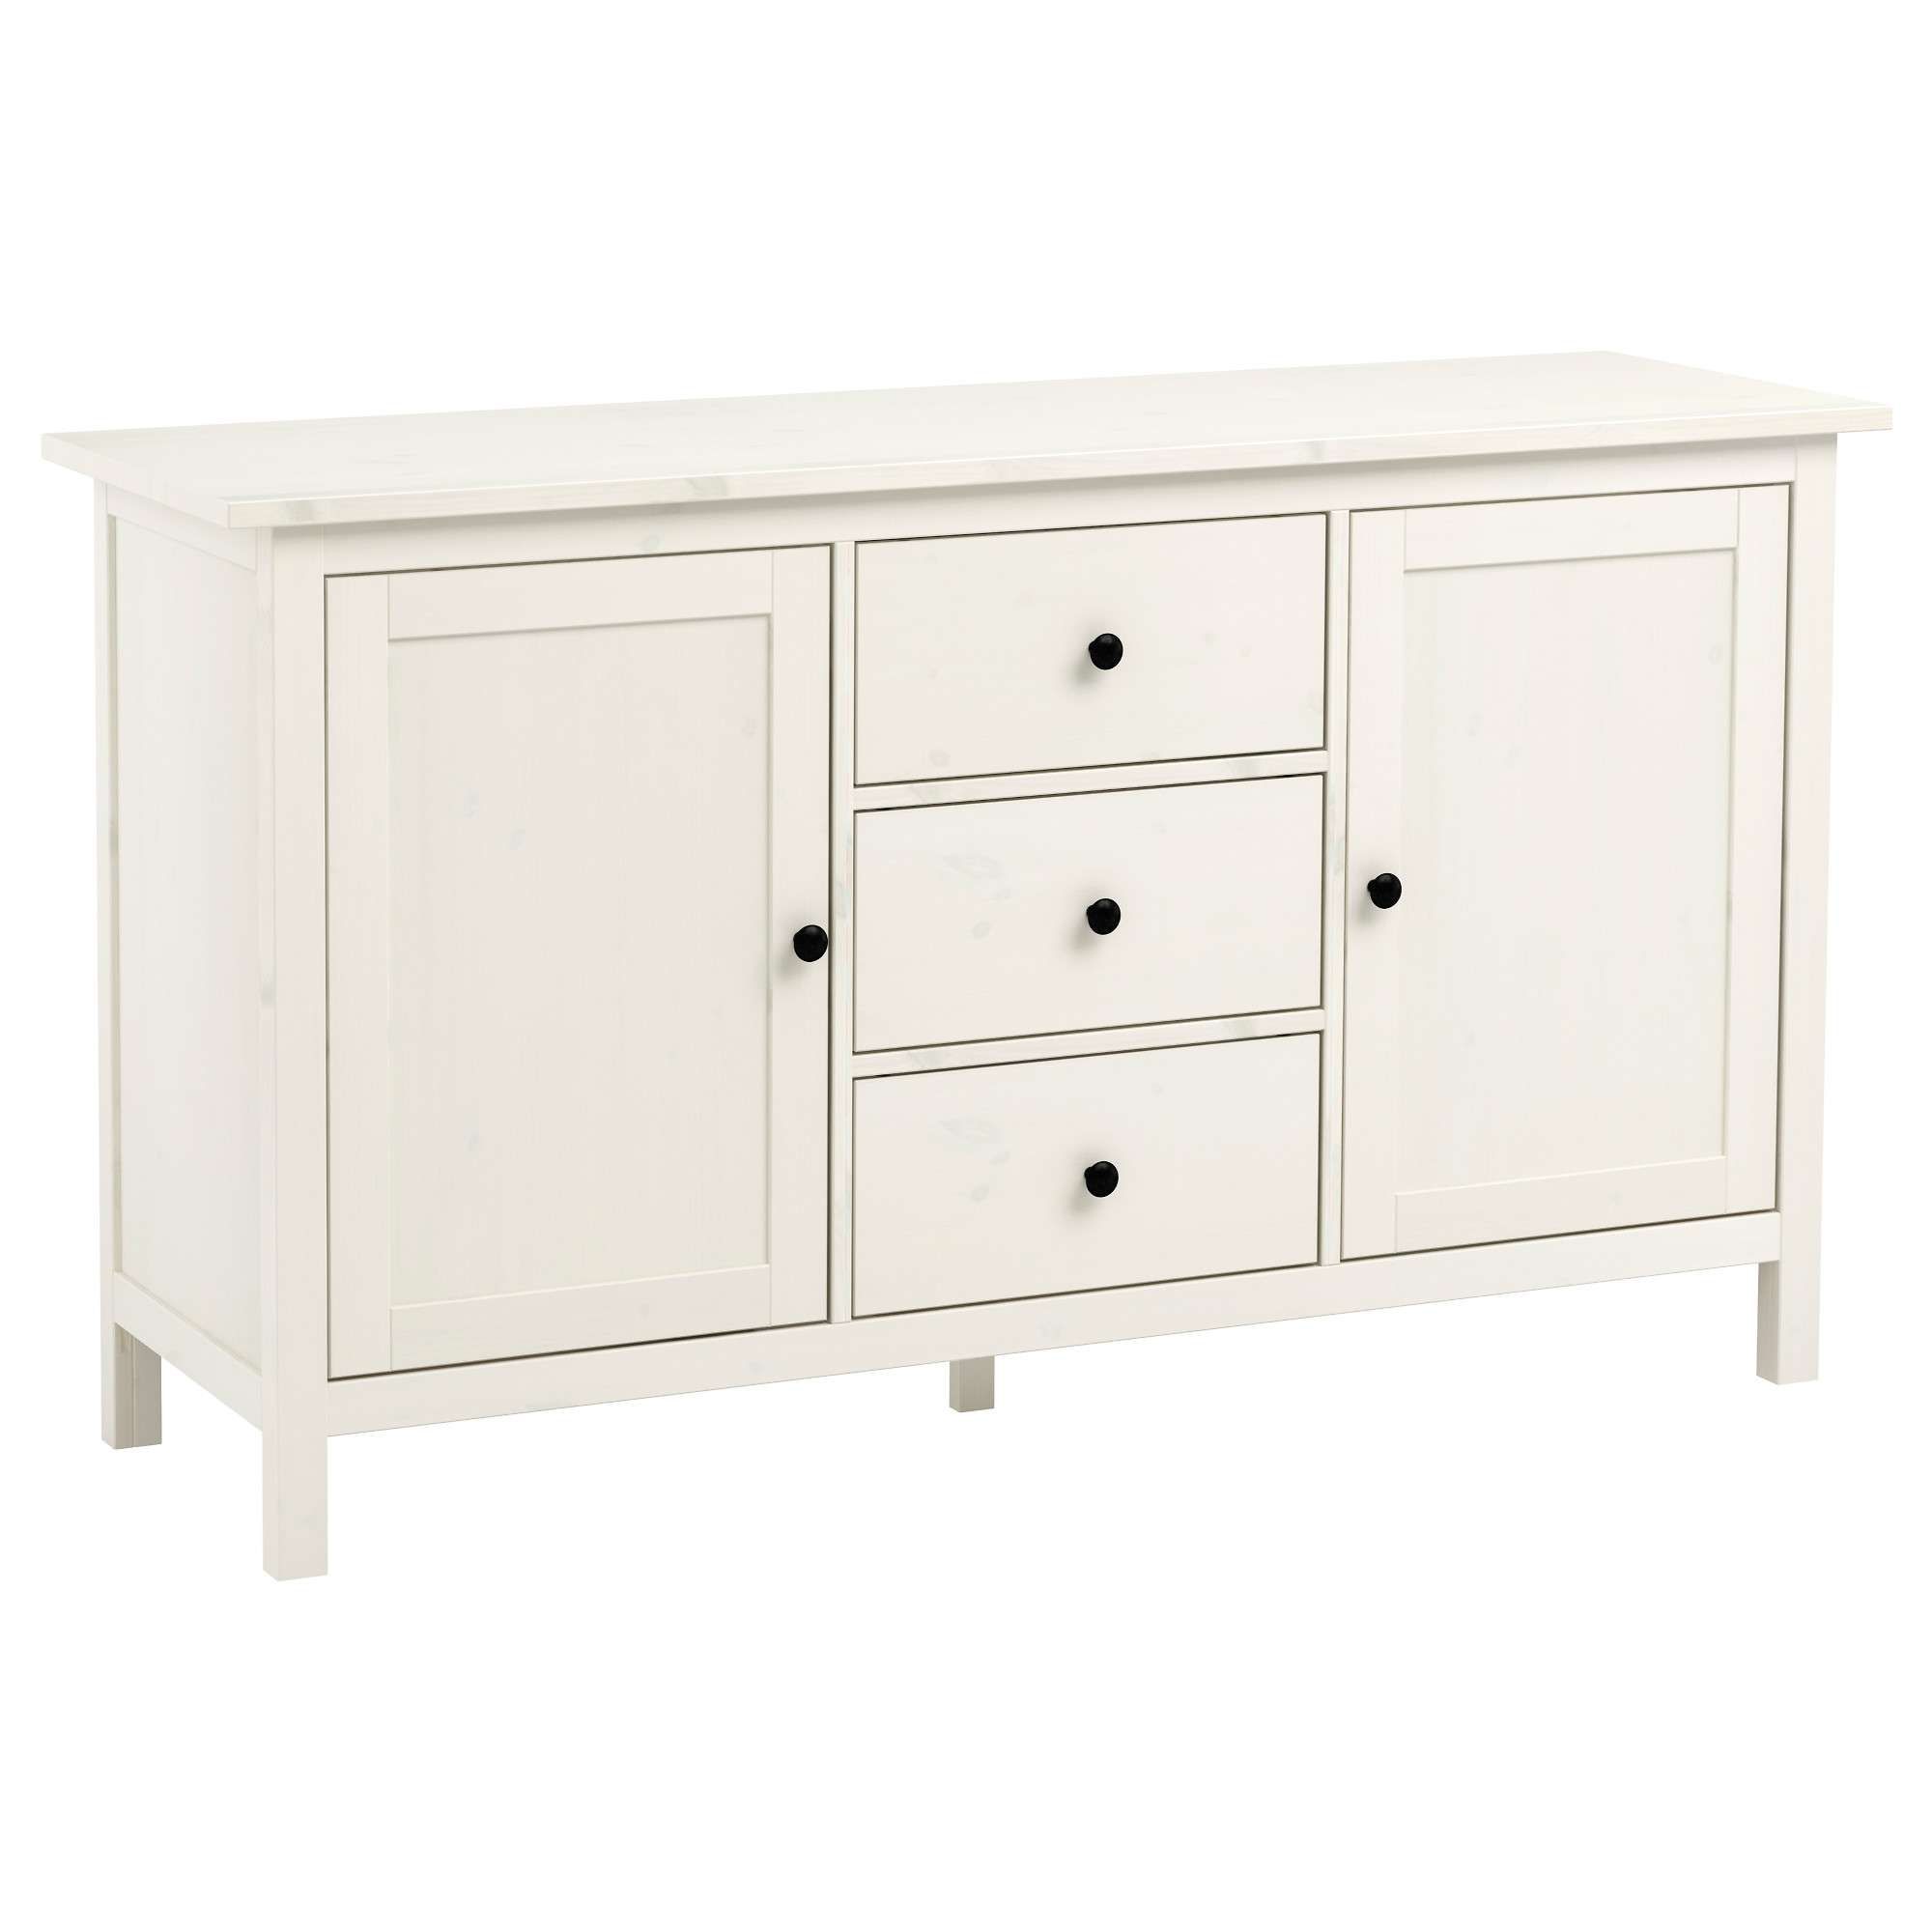 Hemnes Sideboard – White Stain – Ikea In Canada Ikea Sideboards (View 2 of 20)